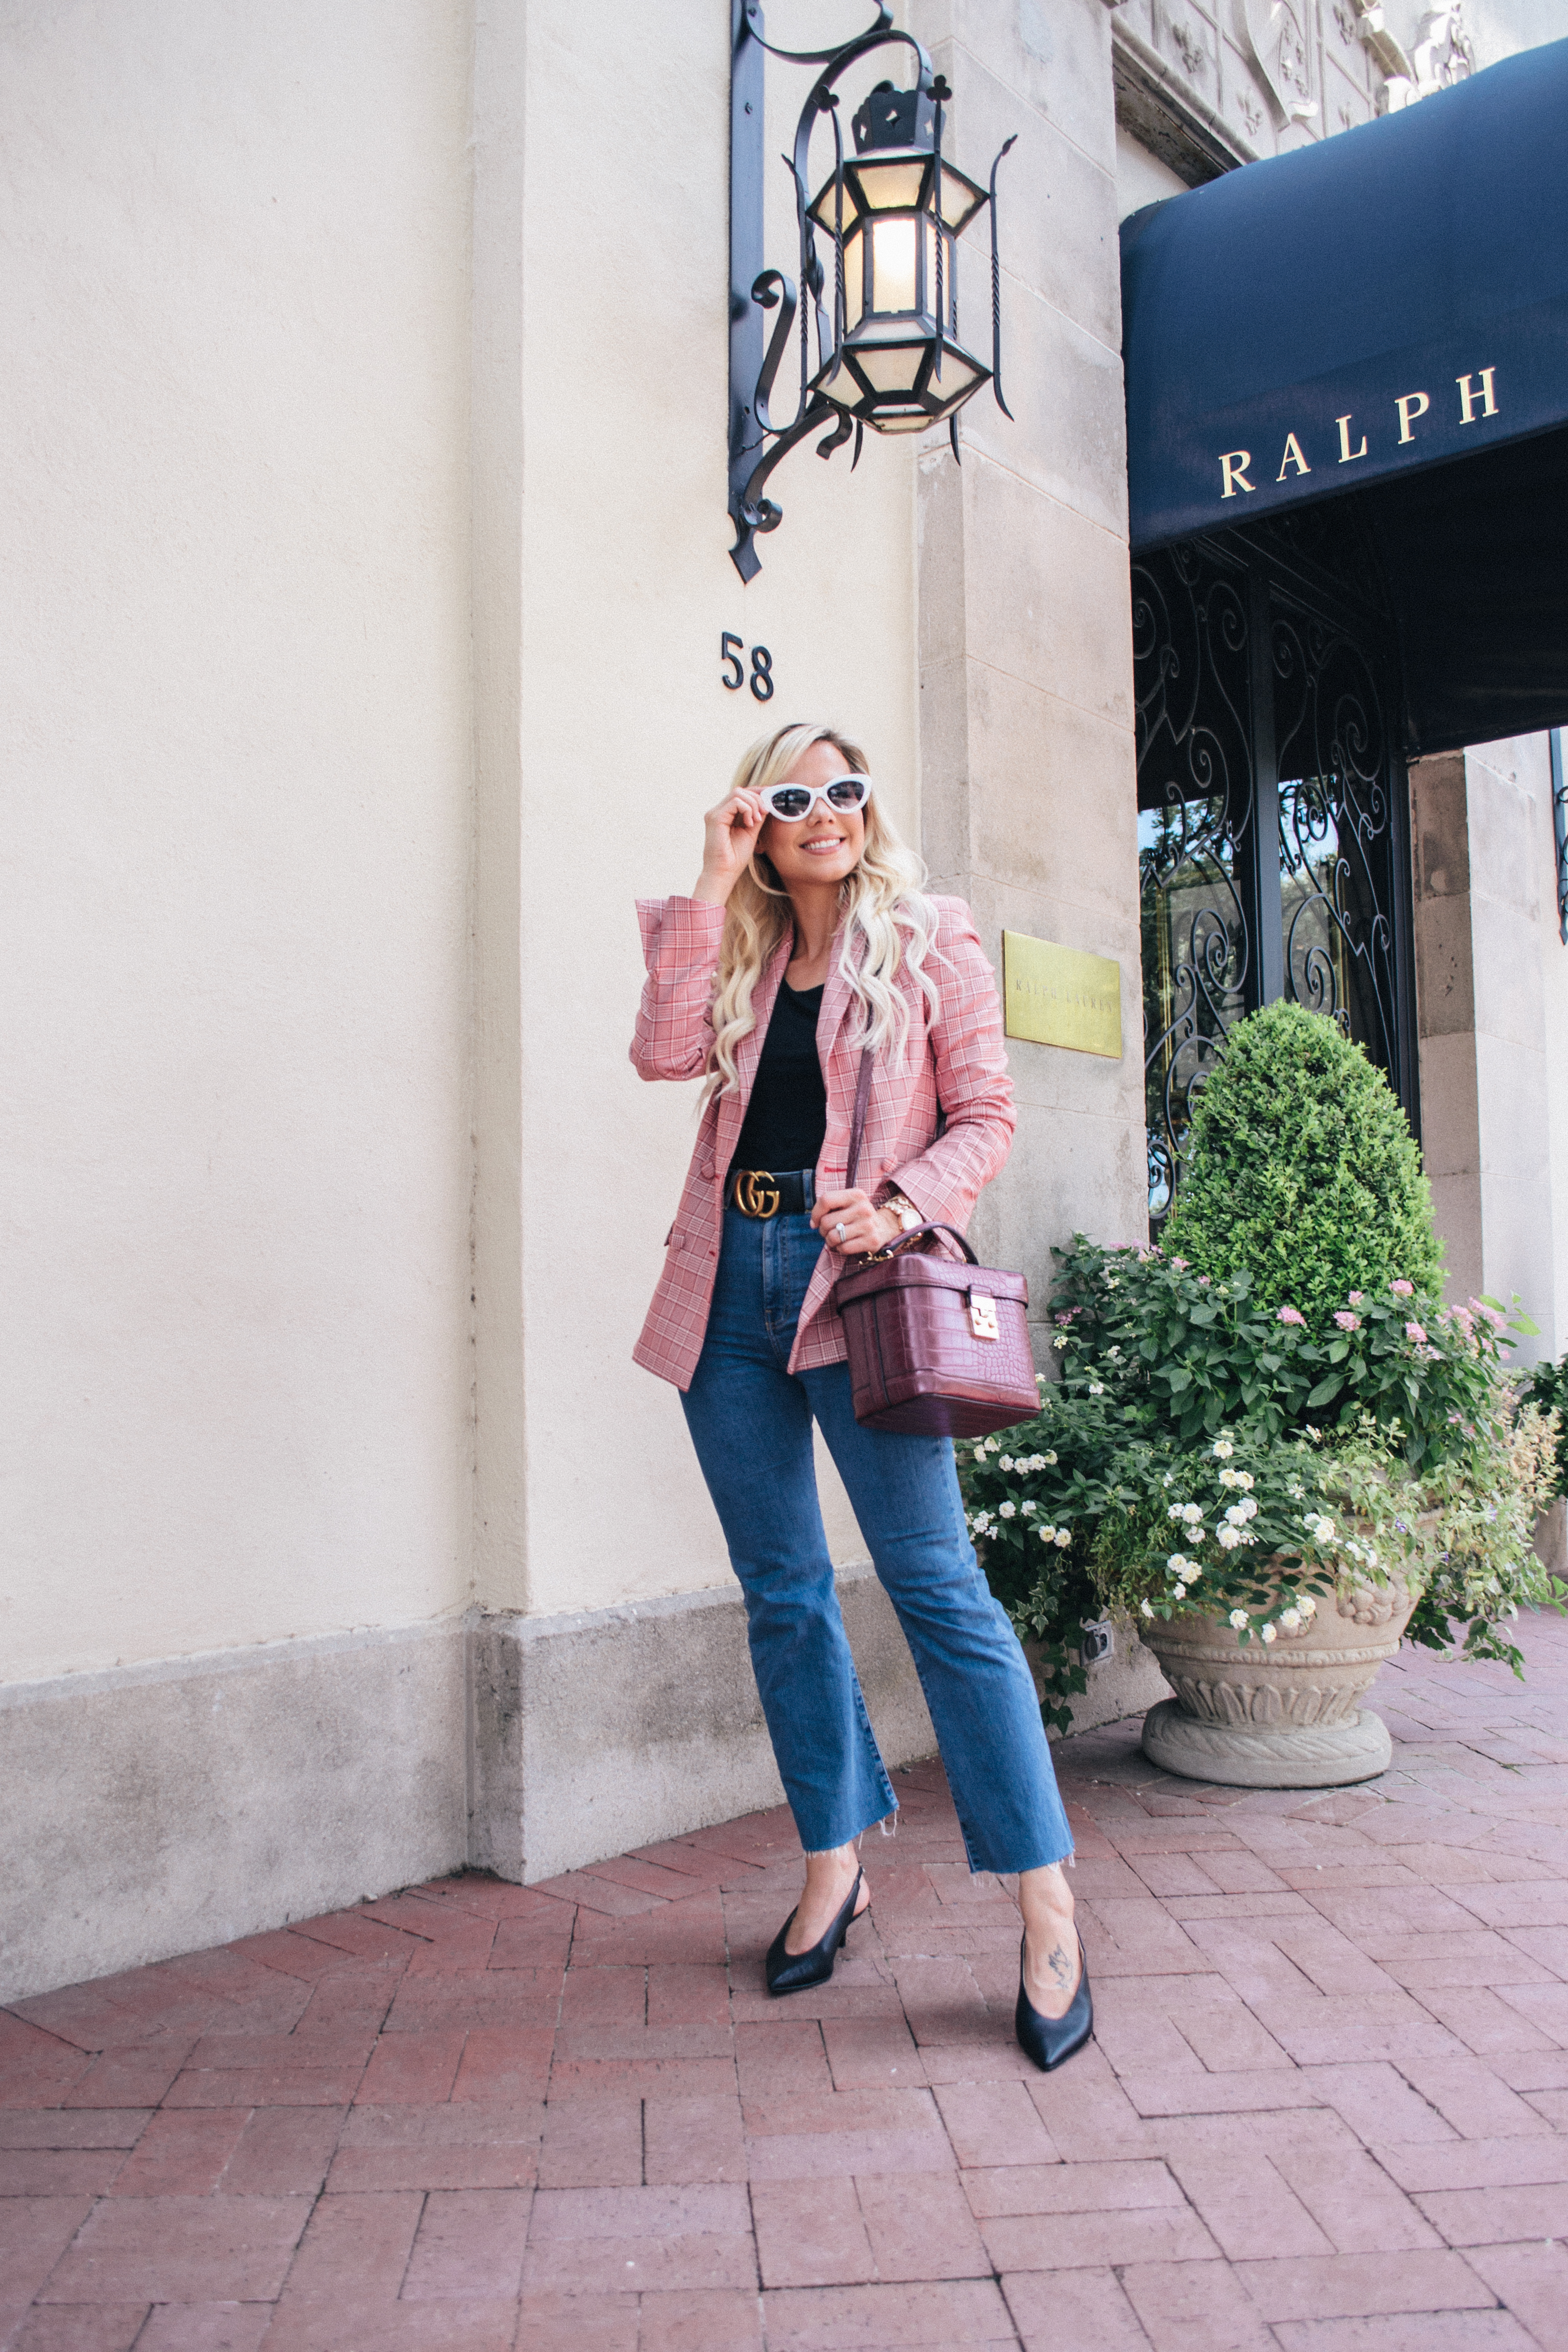 Fall Trend Memo: Check Blazers, saville row blazers for fall 2018, fall outfit, blonde blogger, back to school outfit 